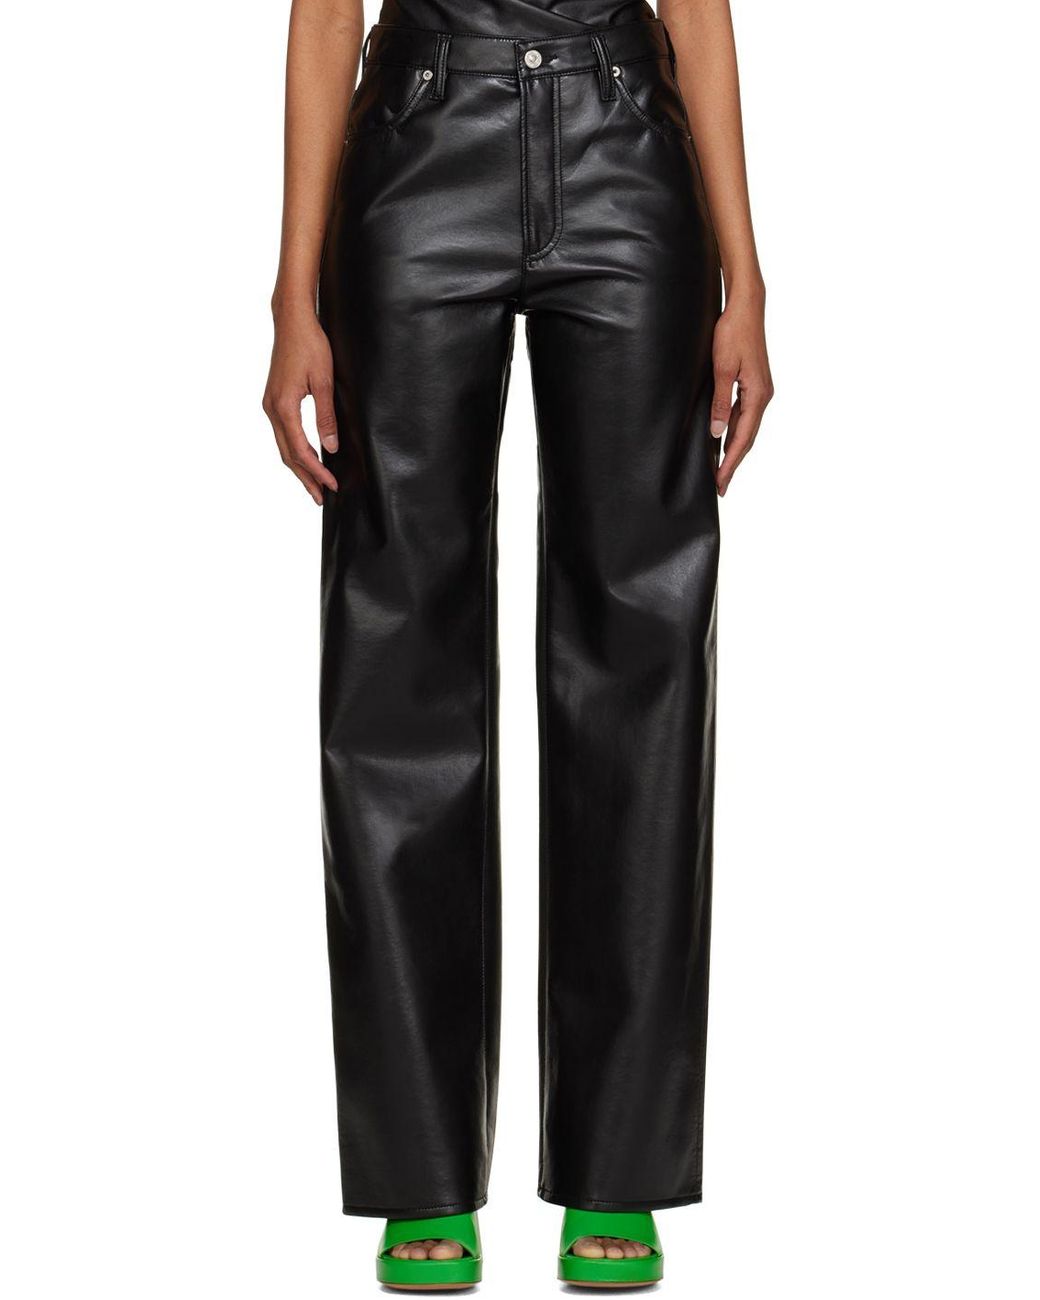 Citizens of Humanity Annina Leather Pants in Black | Lyst